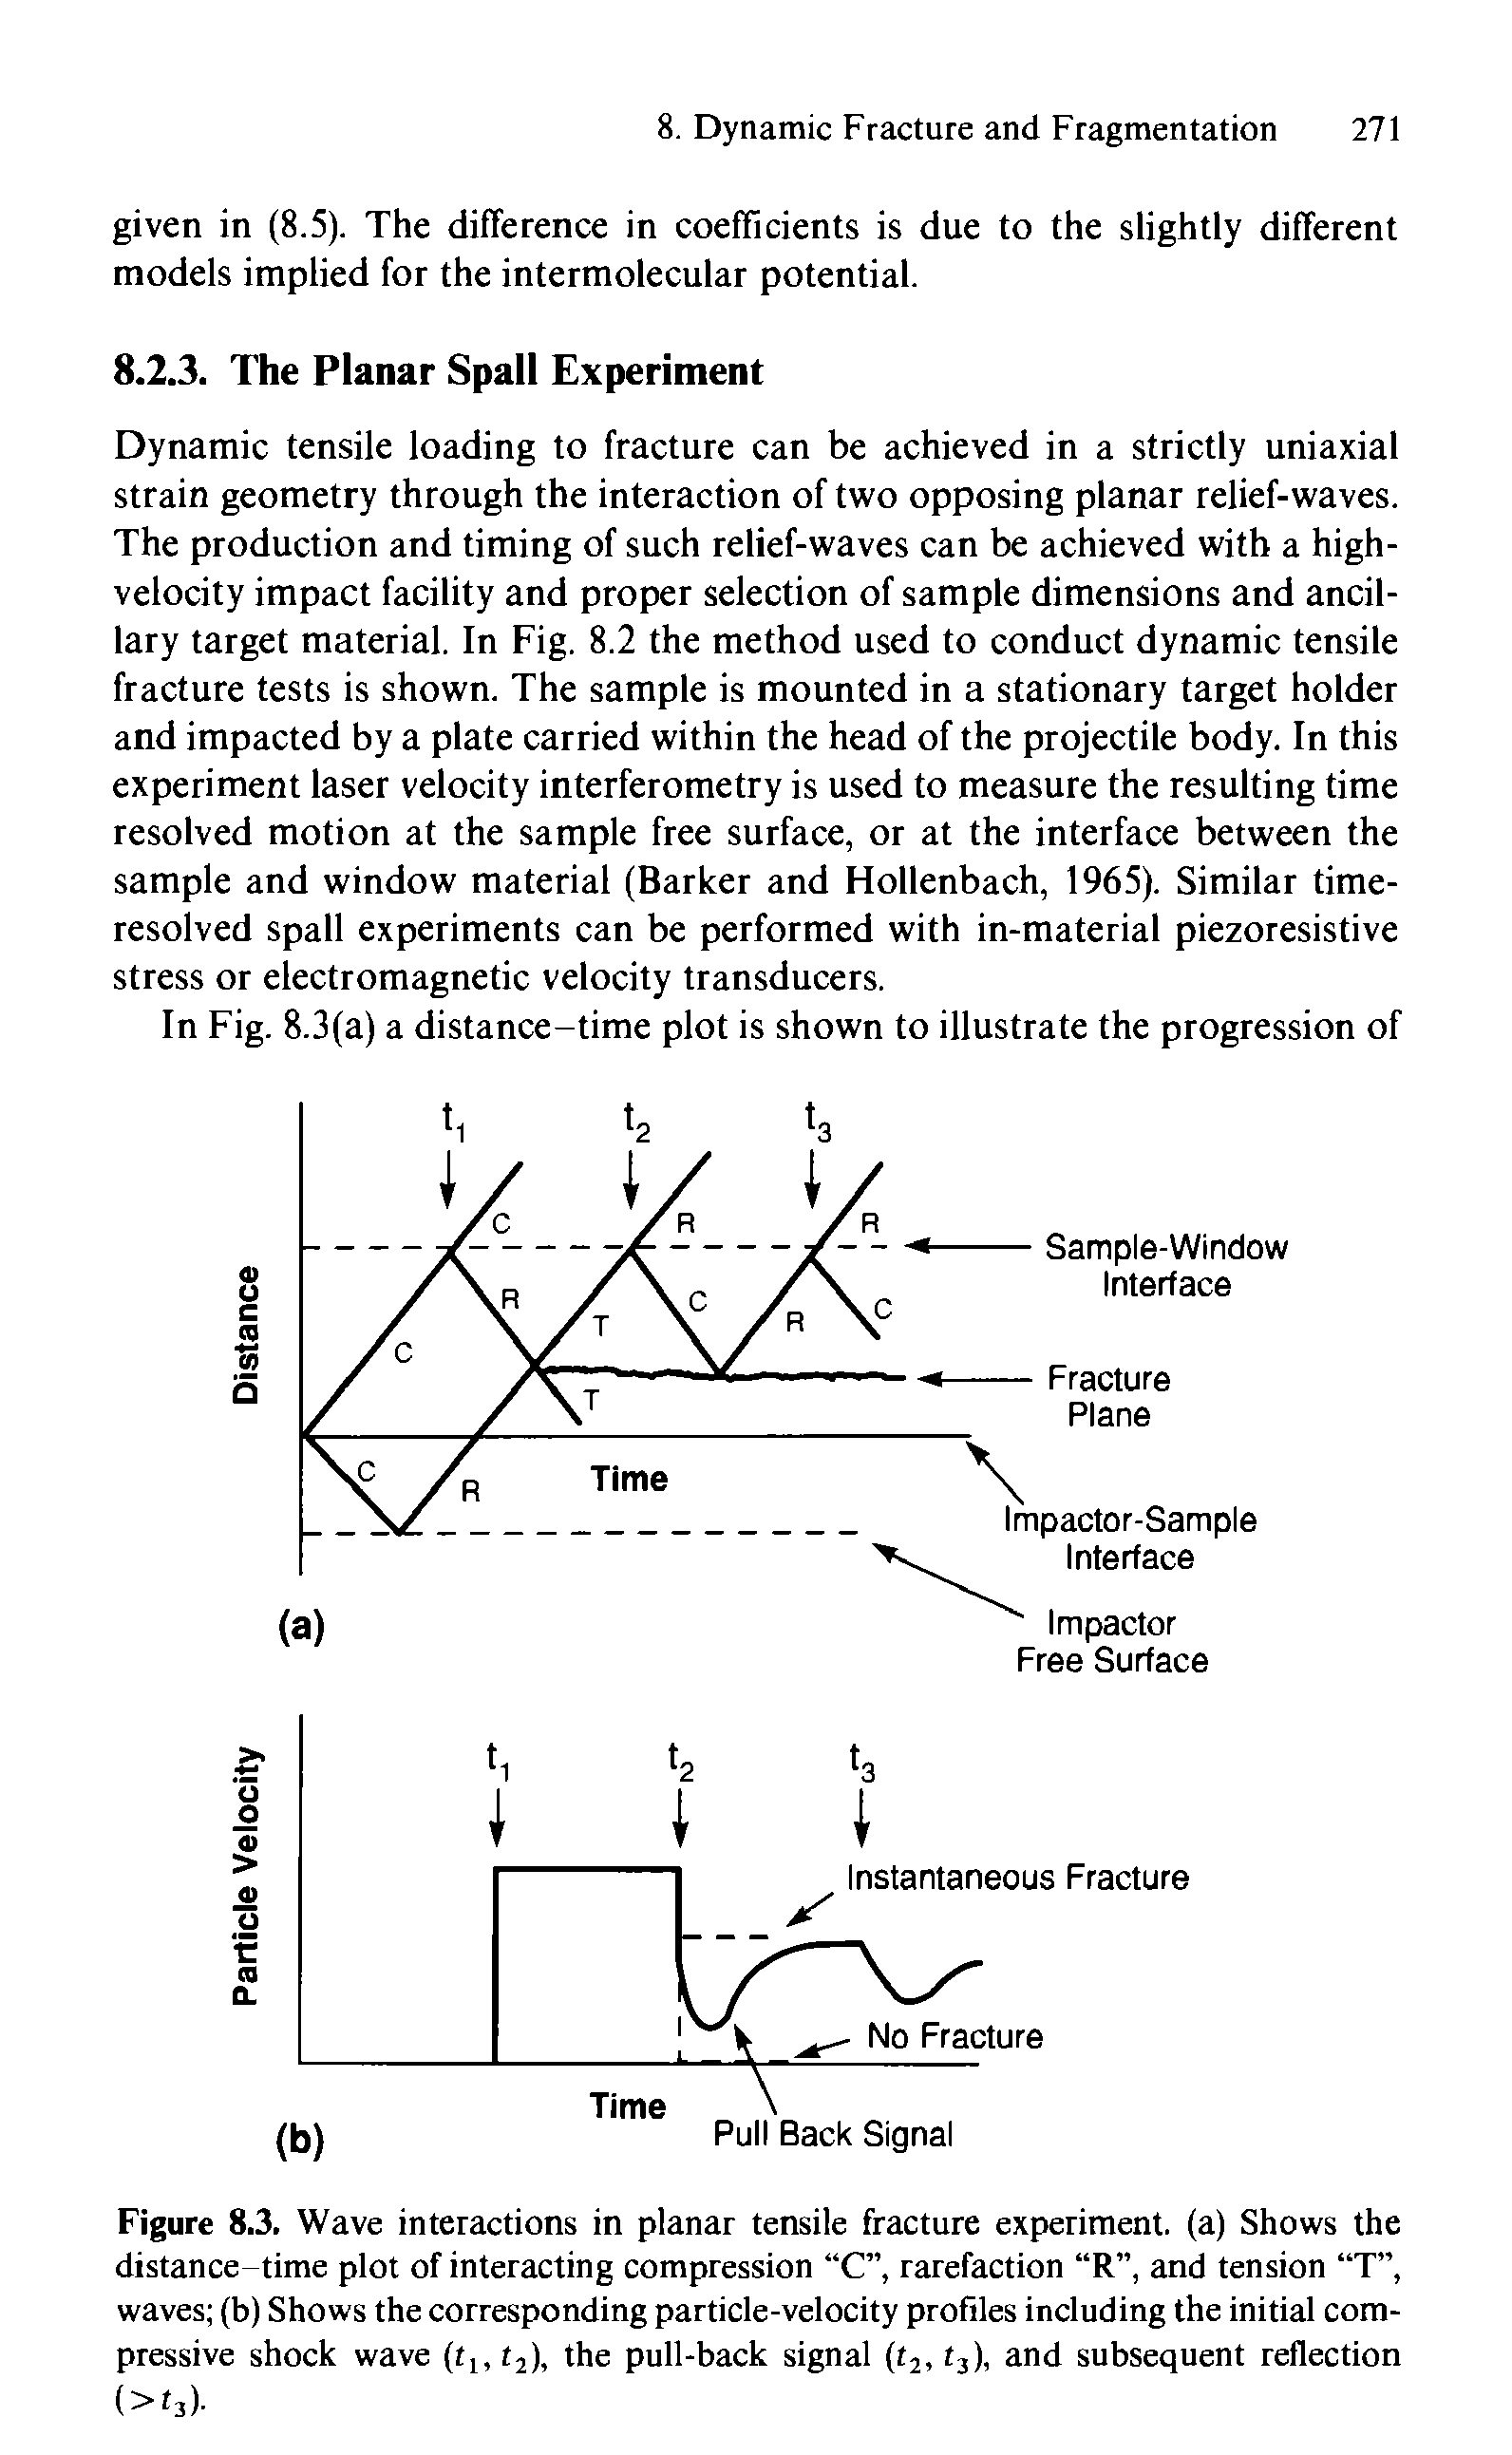 Figure 8.3. Wave interactions in planar tensile fracture experiment, (a) Shows the distance-time plot of interacting compression C , rarefaction R , and tension T , waves (b) Shows the corresponding particle-velocity profiles including the initial compressive shock wave (tj, tj), the pull-back signal (tj, tj), and subsequent reflection >h).